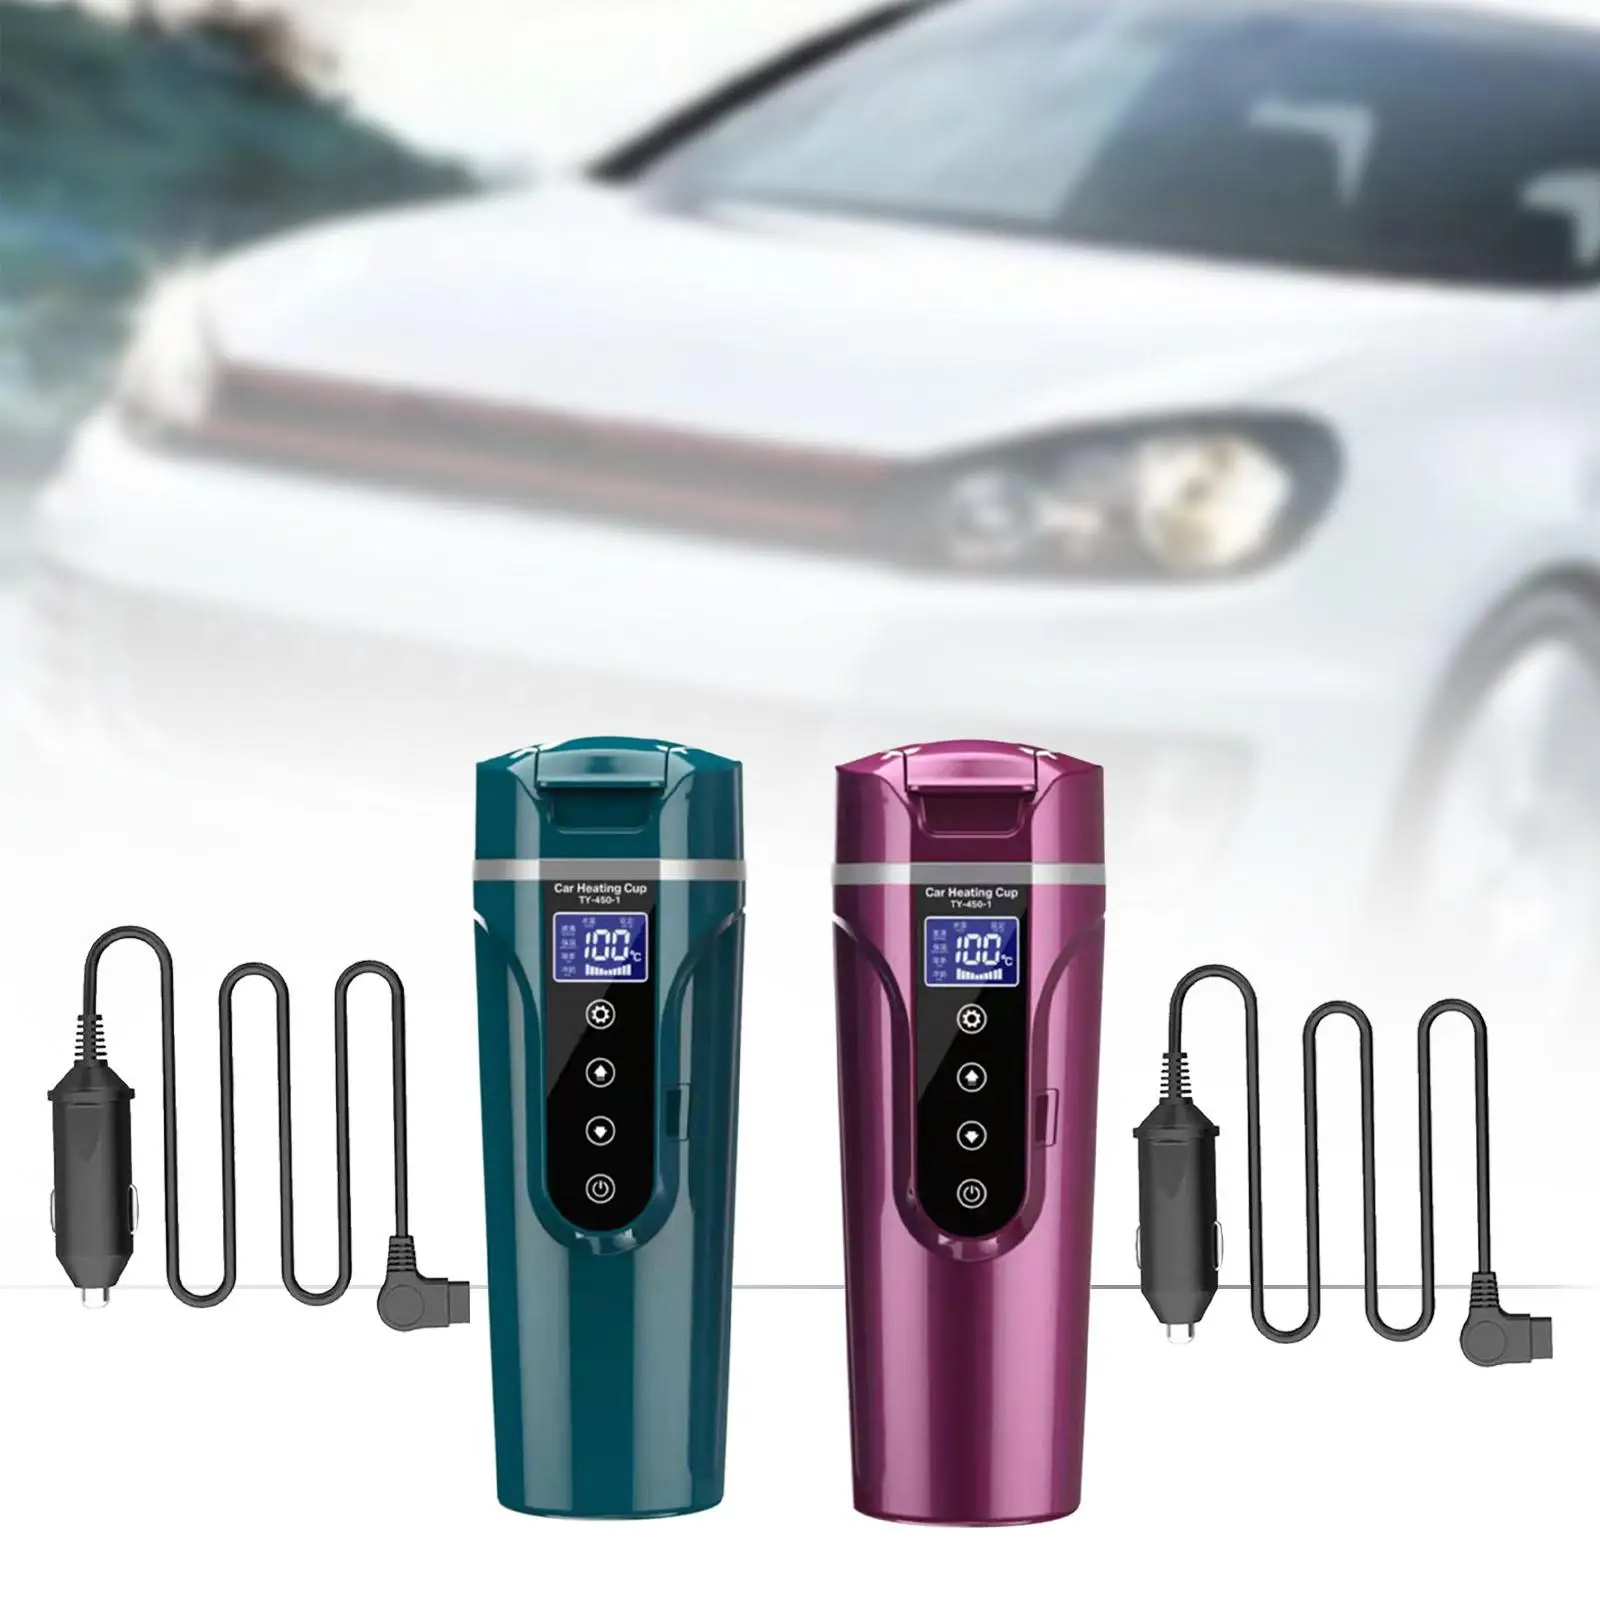 12V/24V Travel Car Truck Kettle for Car Truck Quick Heating Leakproof Car Heating Mug Car Kettle for Tea Milk Water Coffee Auto